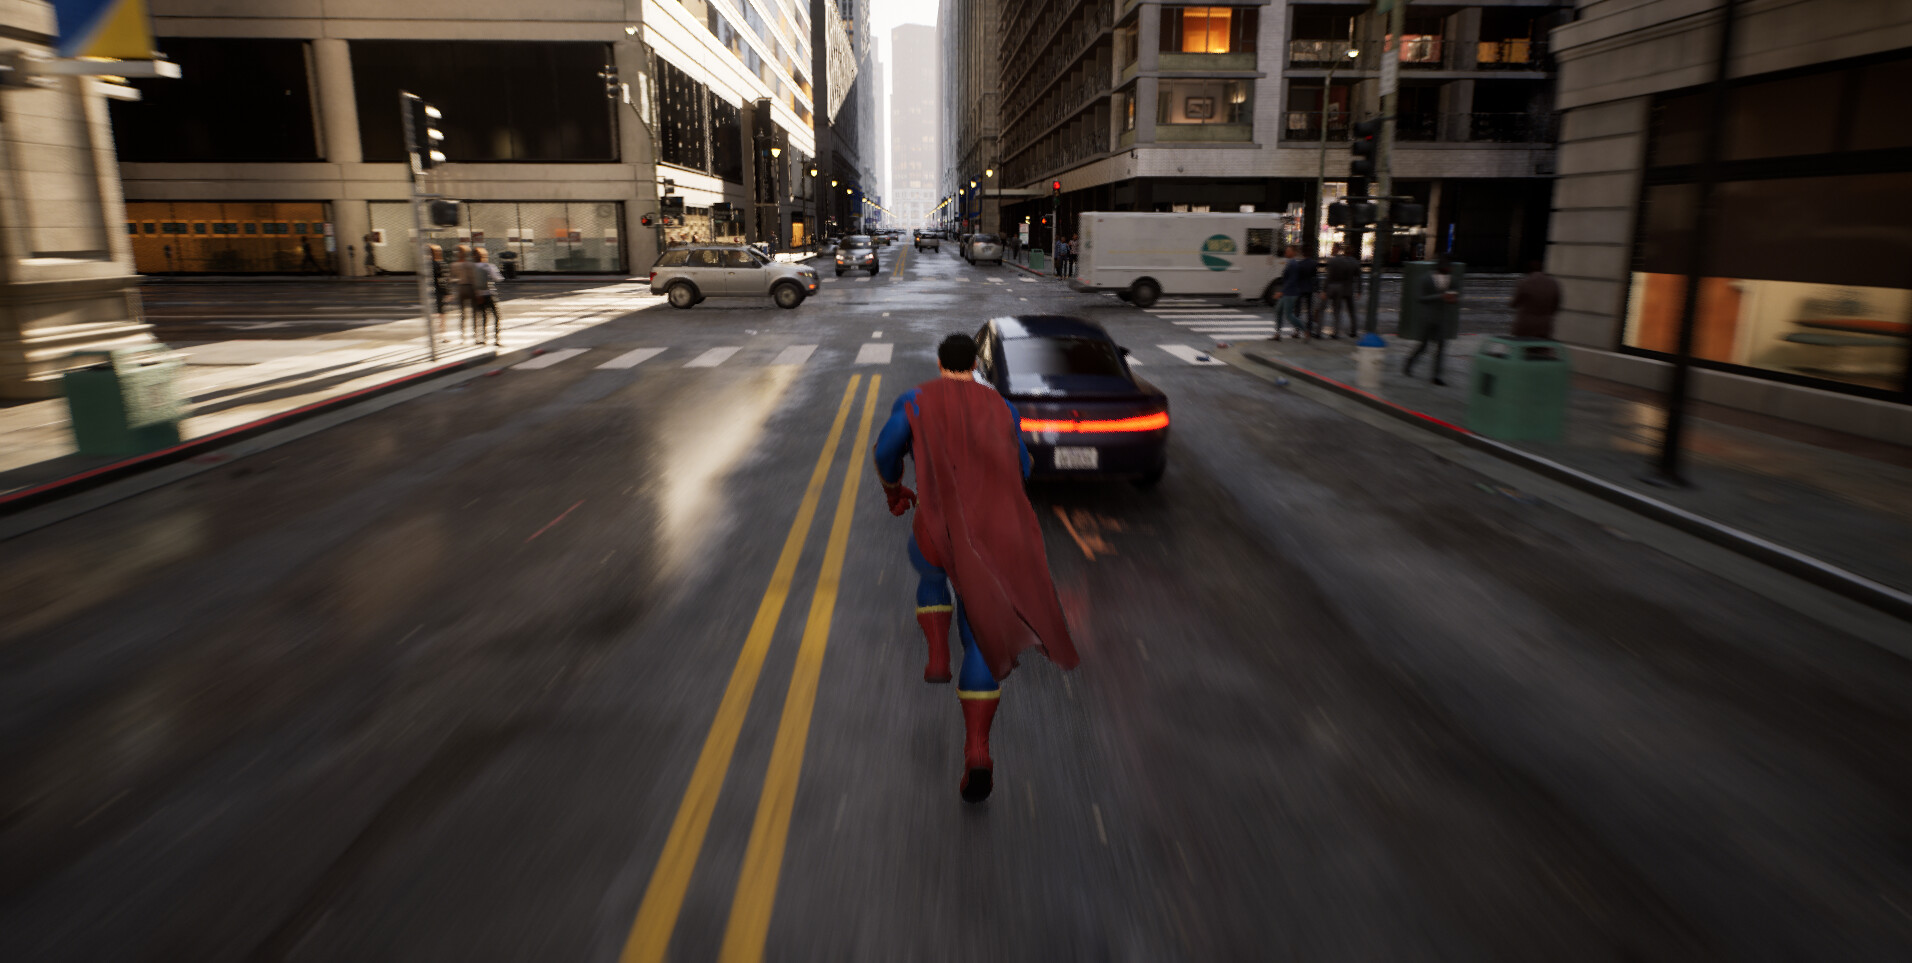 Heroes City Superman Edition Free Download